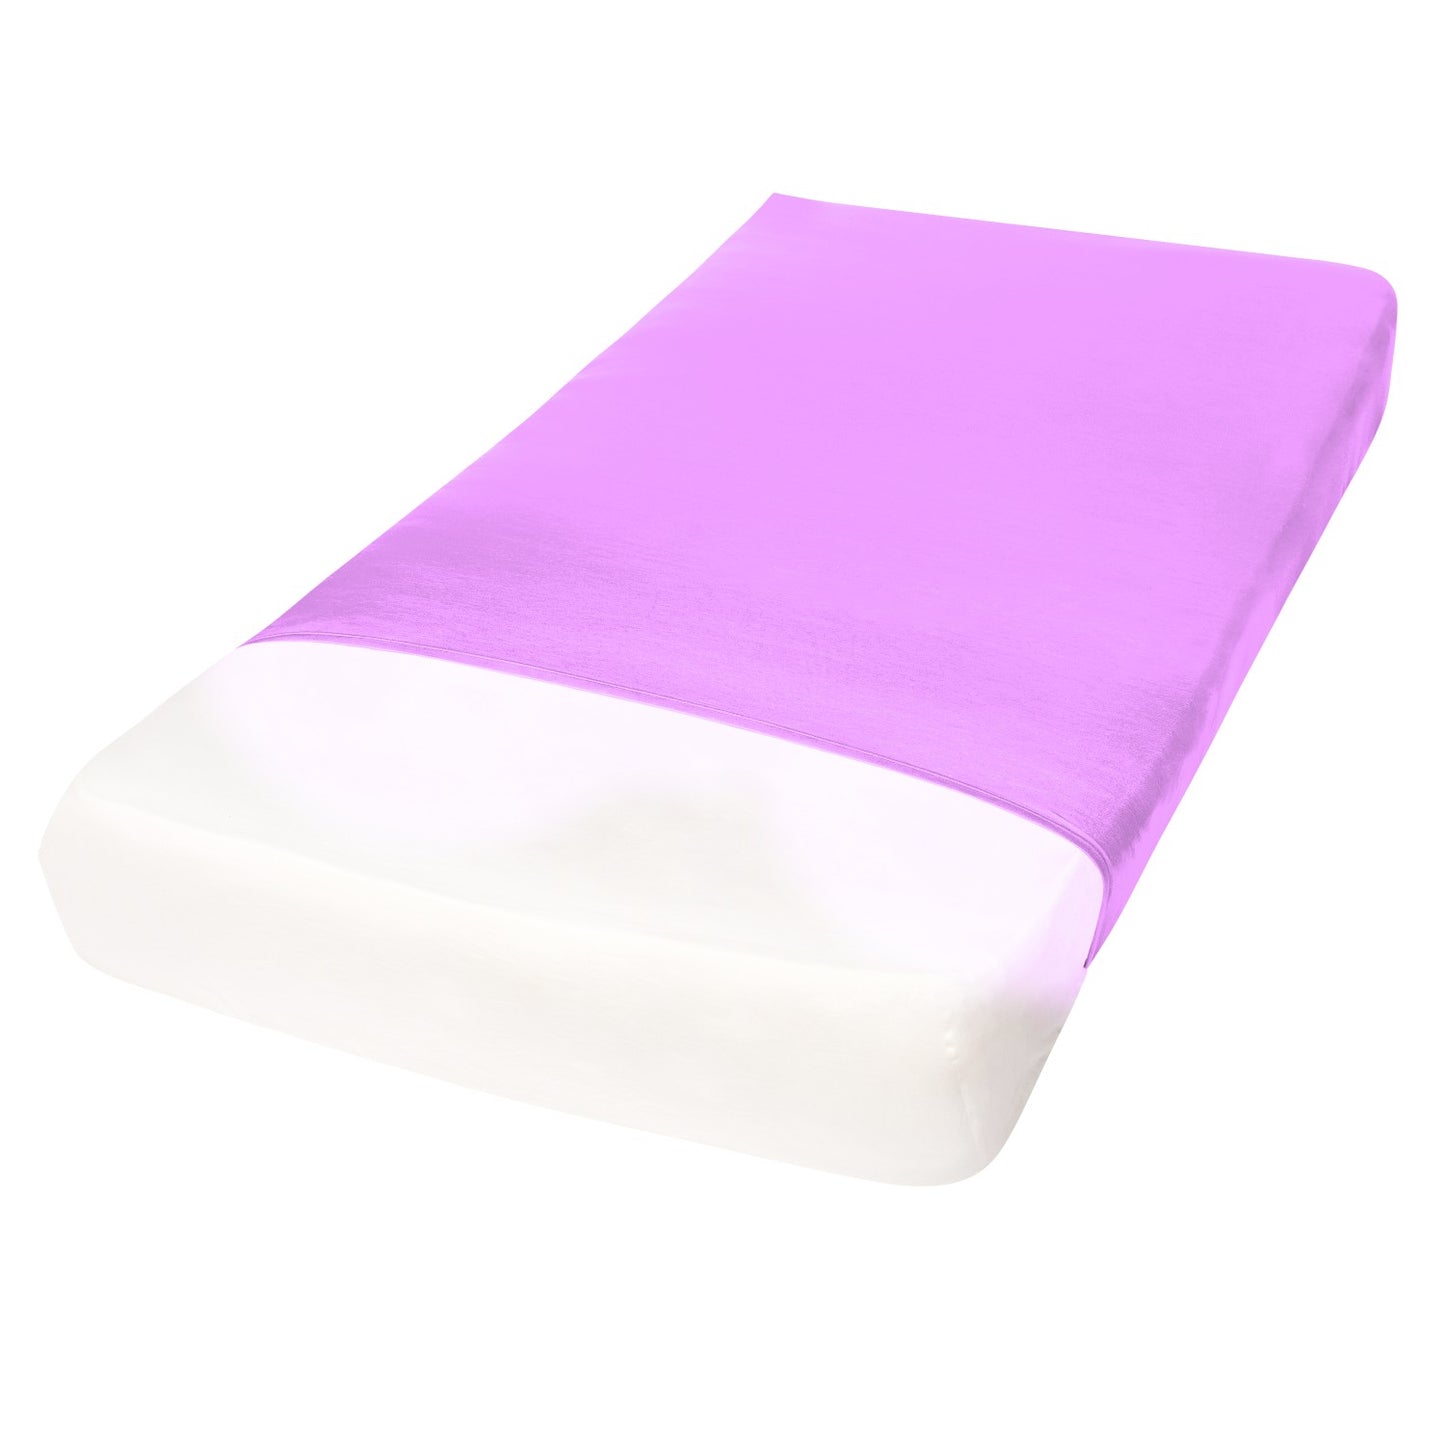 Lilac Sensory Compression Bed Sheet-Alternative to a weighted blanket-single-double bed